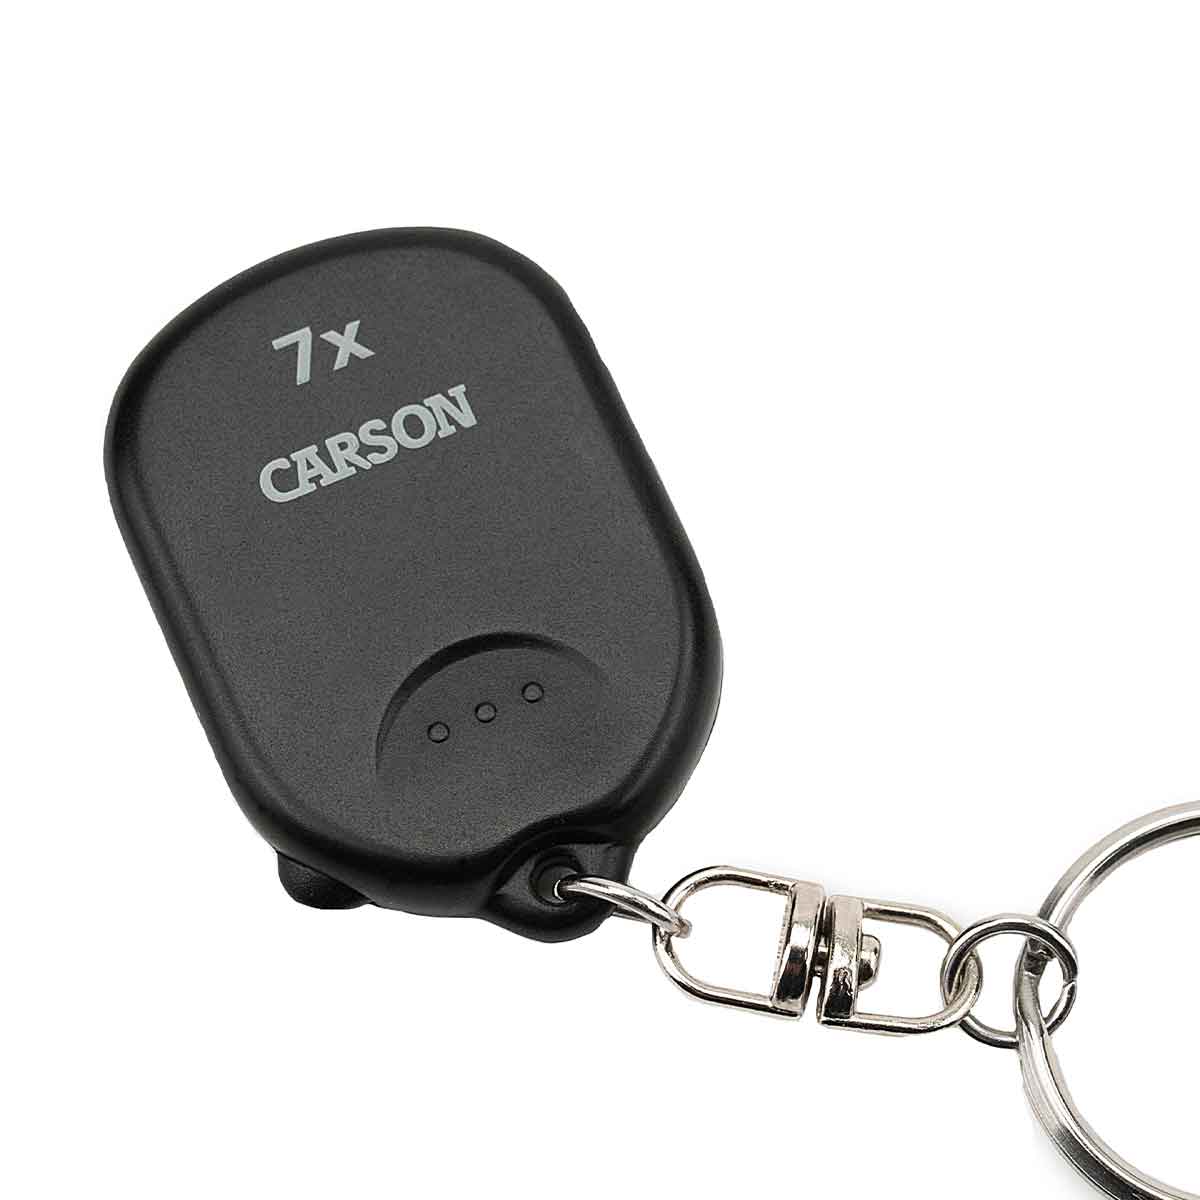 Lupa Carson Pop-Up Keychain Magnifier 7x